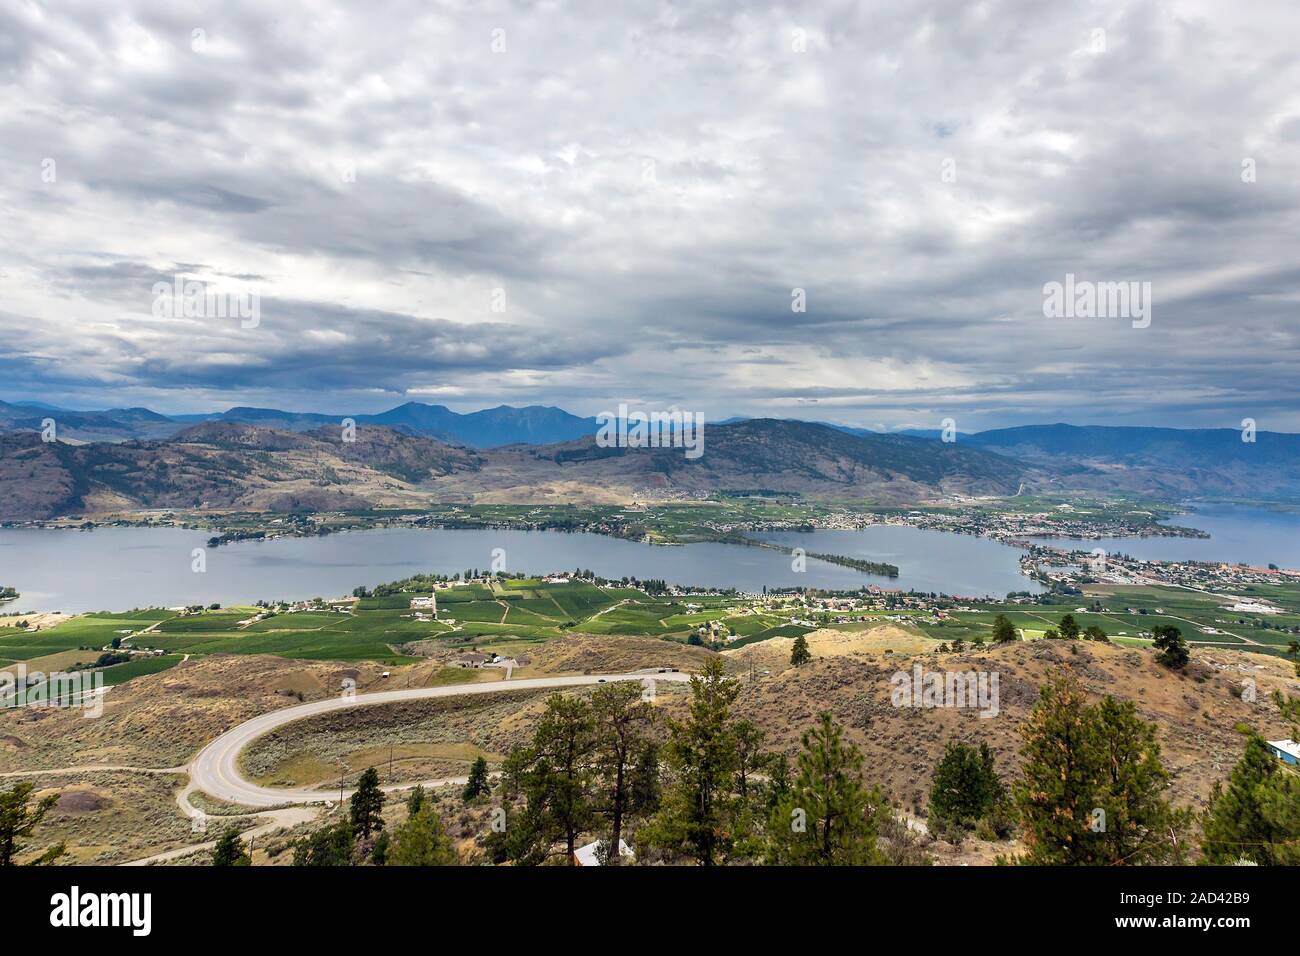 Panoramic view from Osoyoos lookout point over town of Osoyoos, Osoyoos Lake, vineyards, river, cloudy skies. Okanagan, British Columbia, Canada Stock Photo